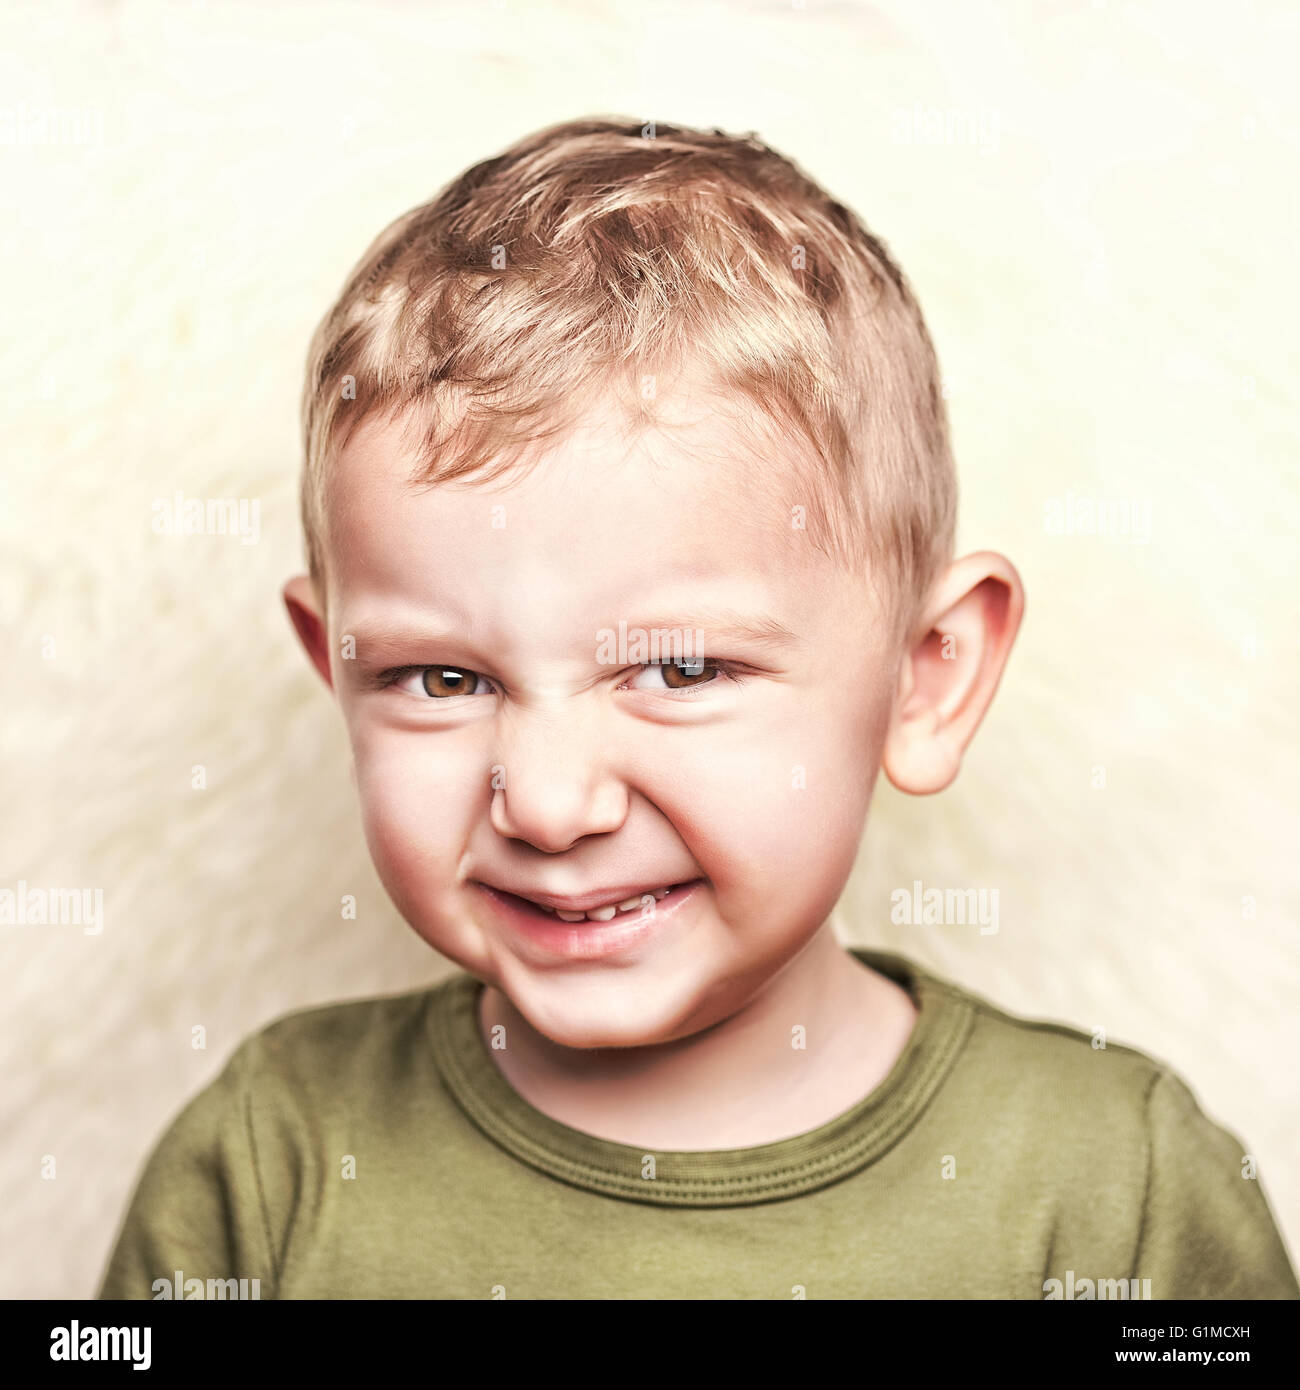 little child portrait and fur background Stock Photo